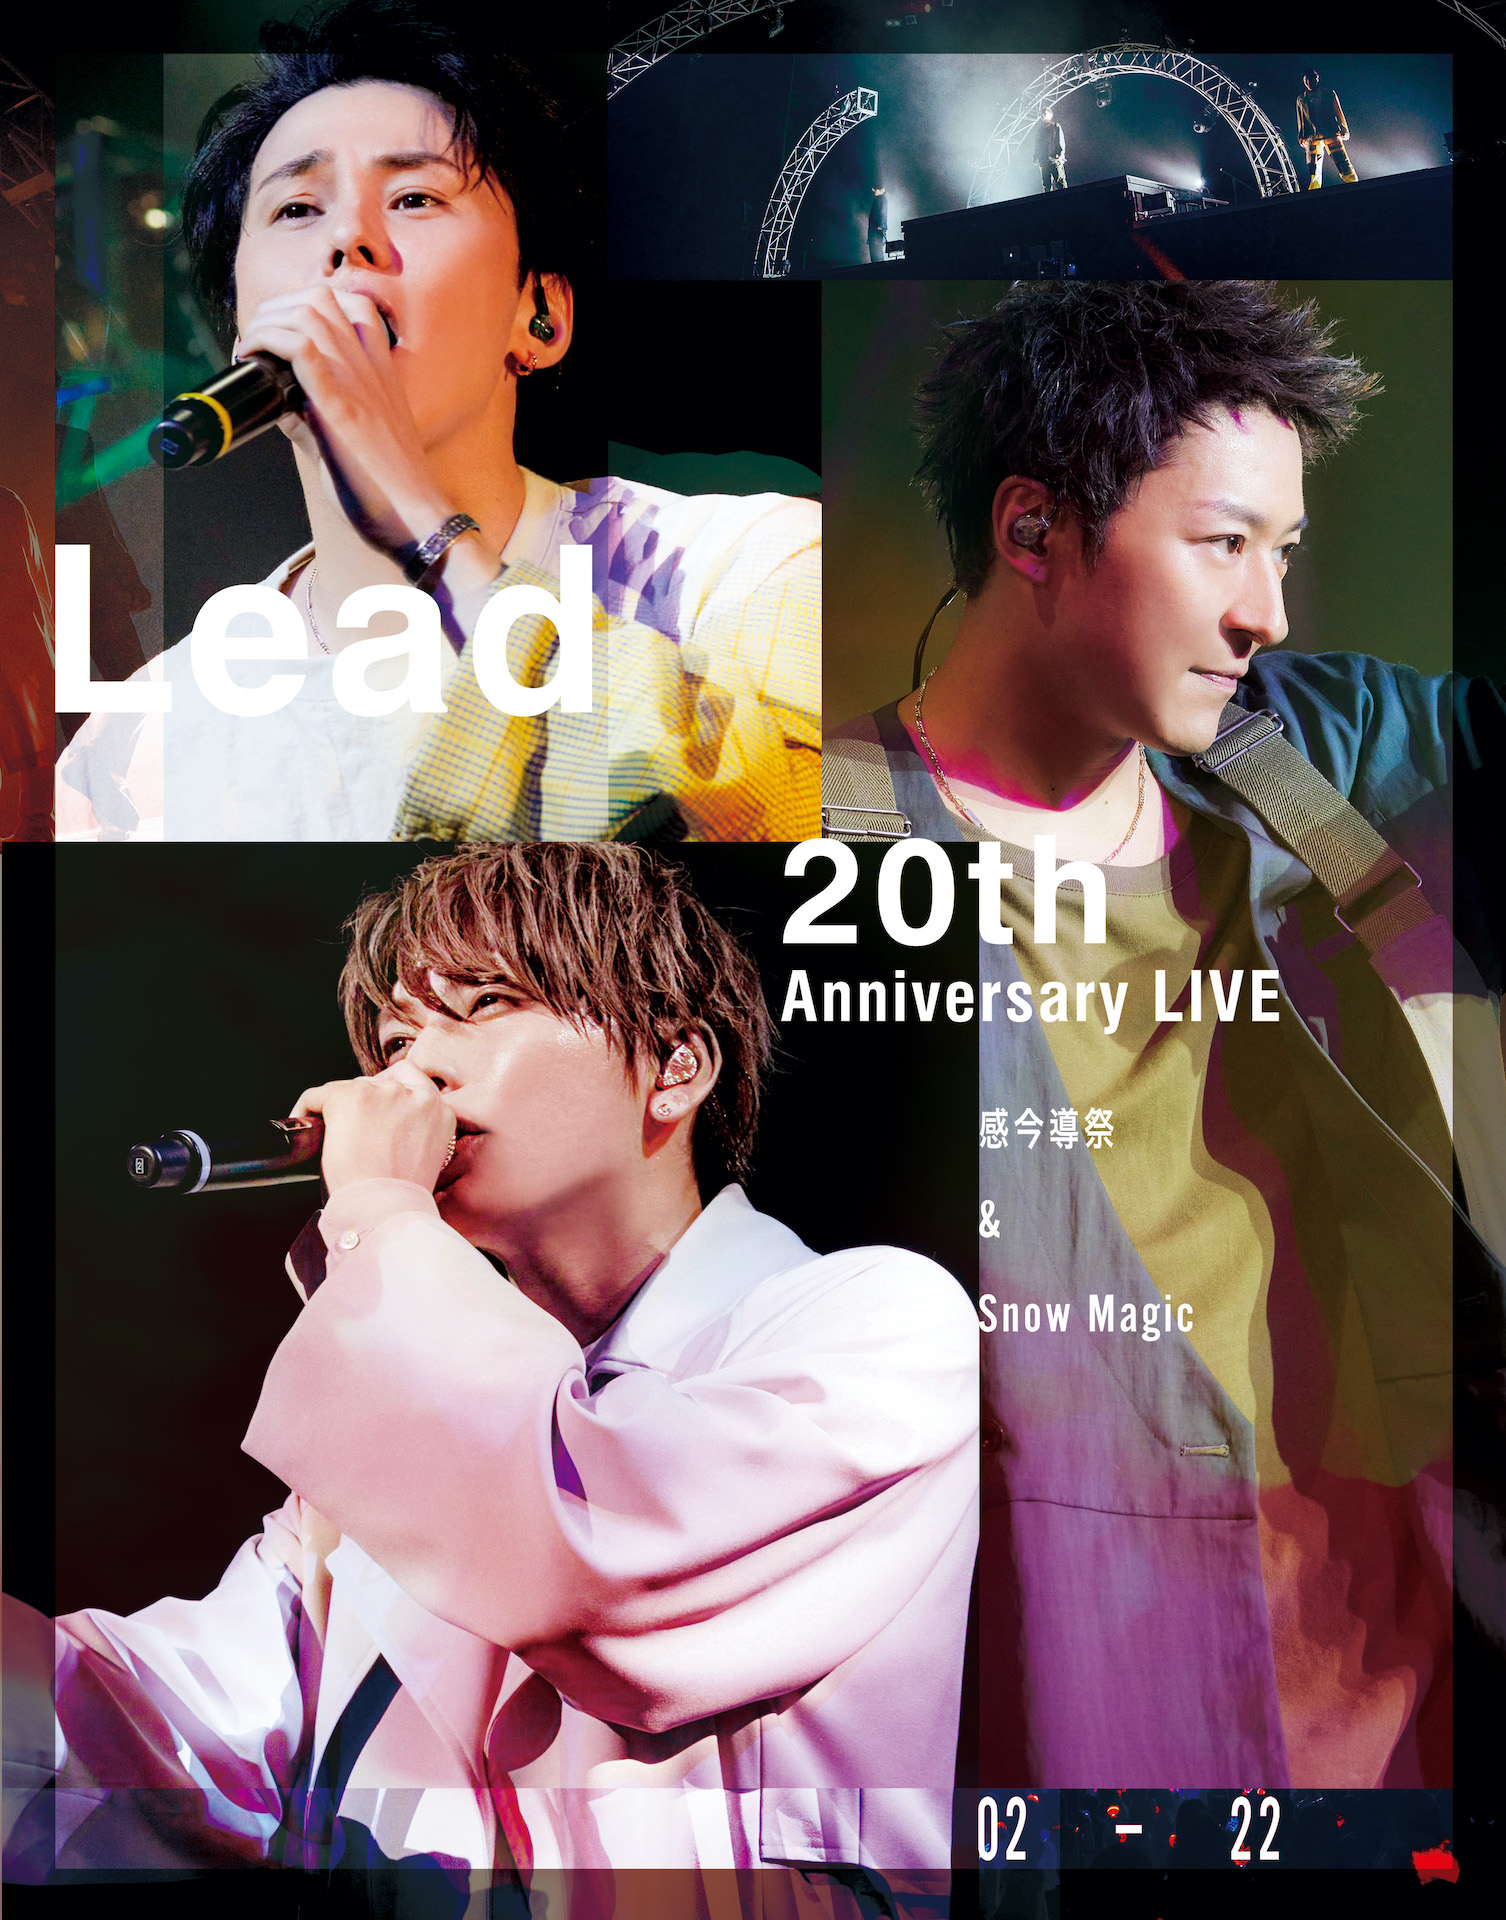 "Lead 20th Anniversary Live ~KANKONDOUSAI & Snow Magic~" Normal Edition (2Blu-ray) Release on March 22th, 2023 No.1